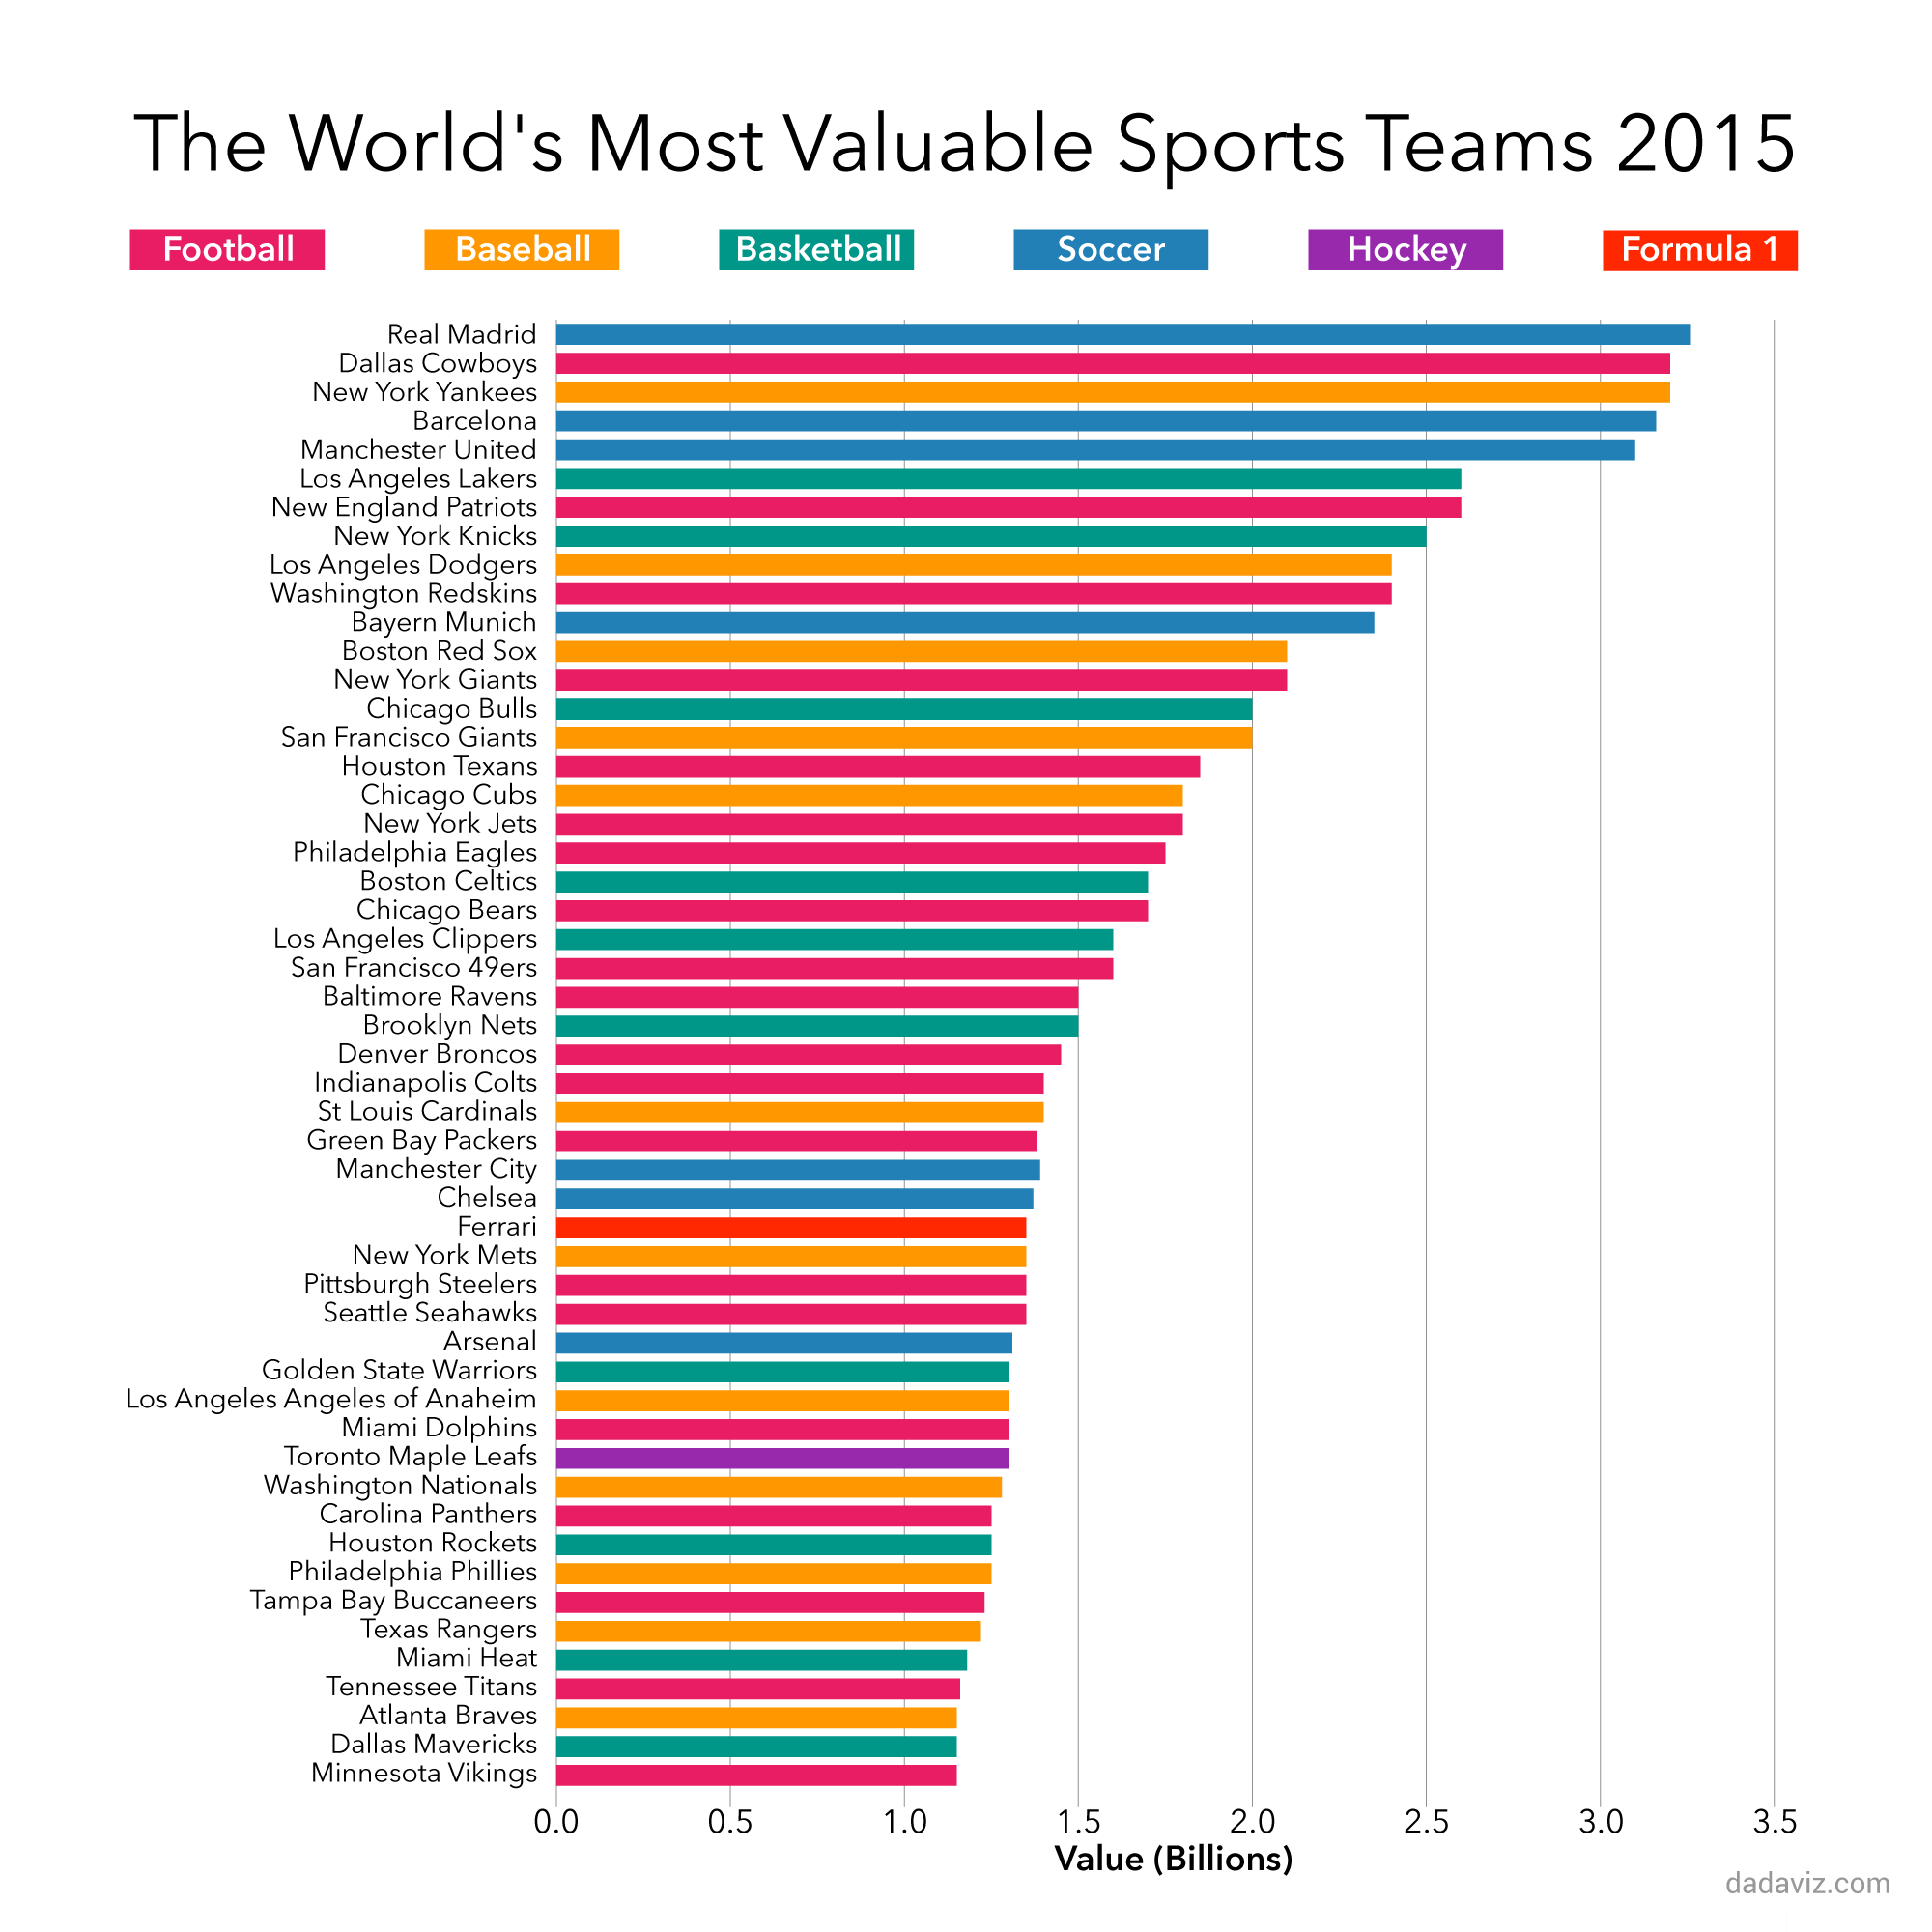 The 50 most valuable sports teams in the world